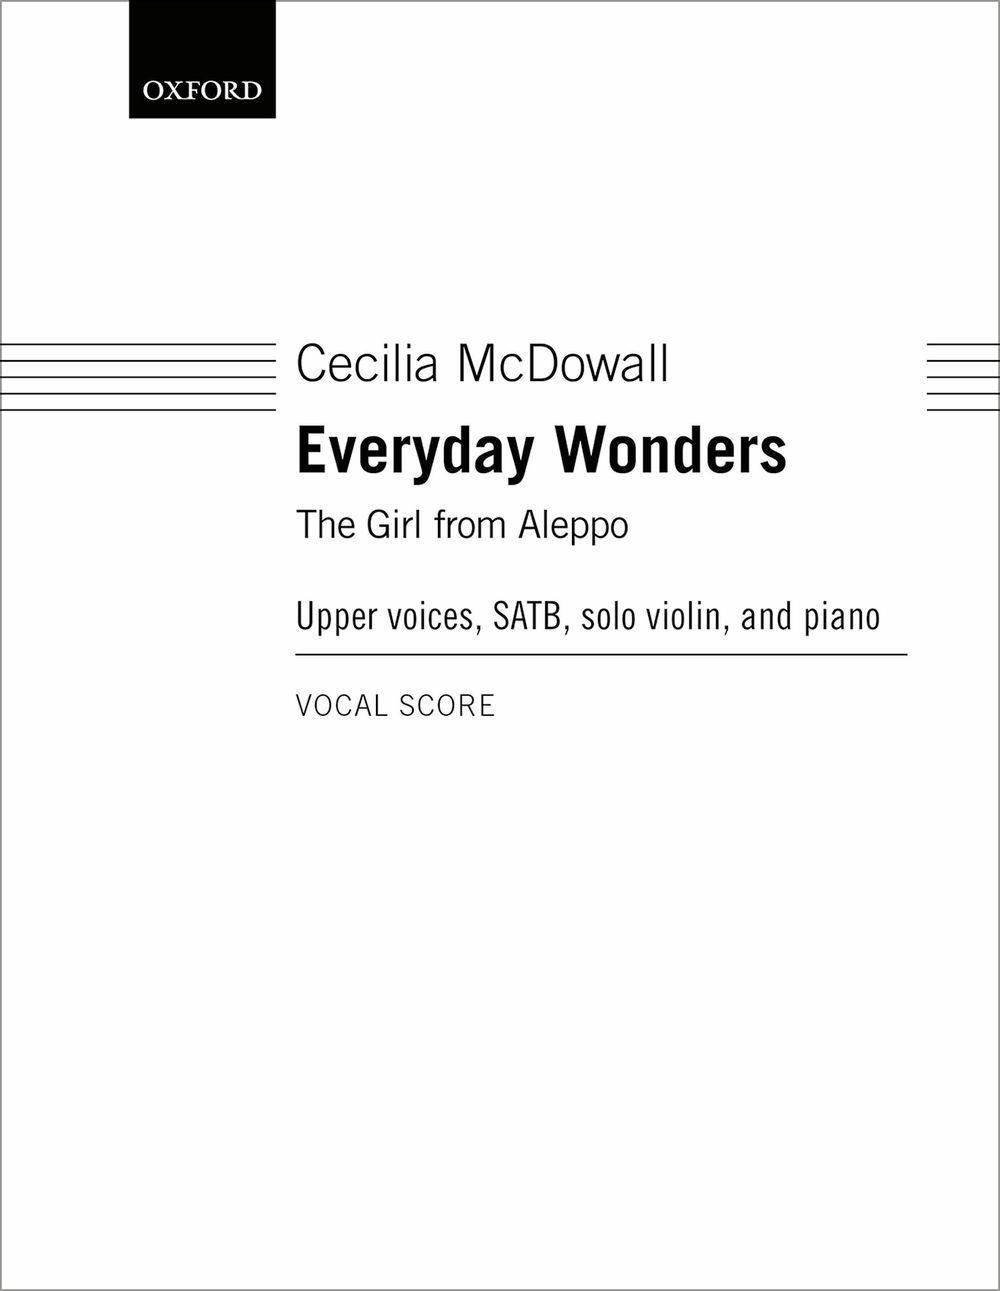 Cecilia McDowall: Everyday Wonders The Girl from Aleppo: SATB: Vocal Score